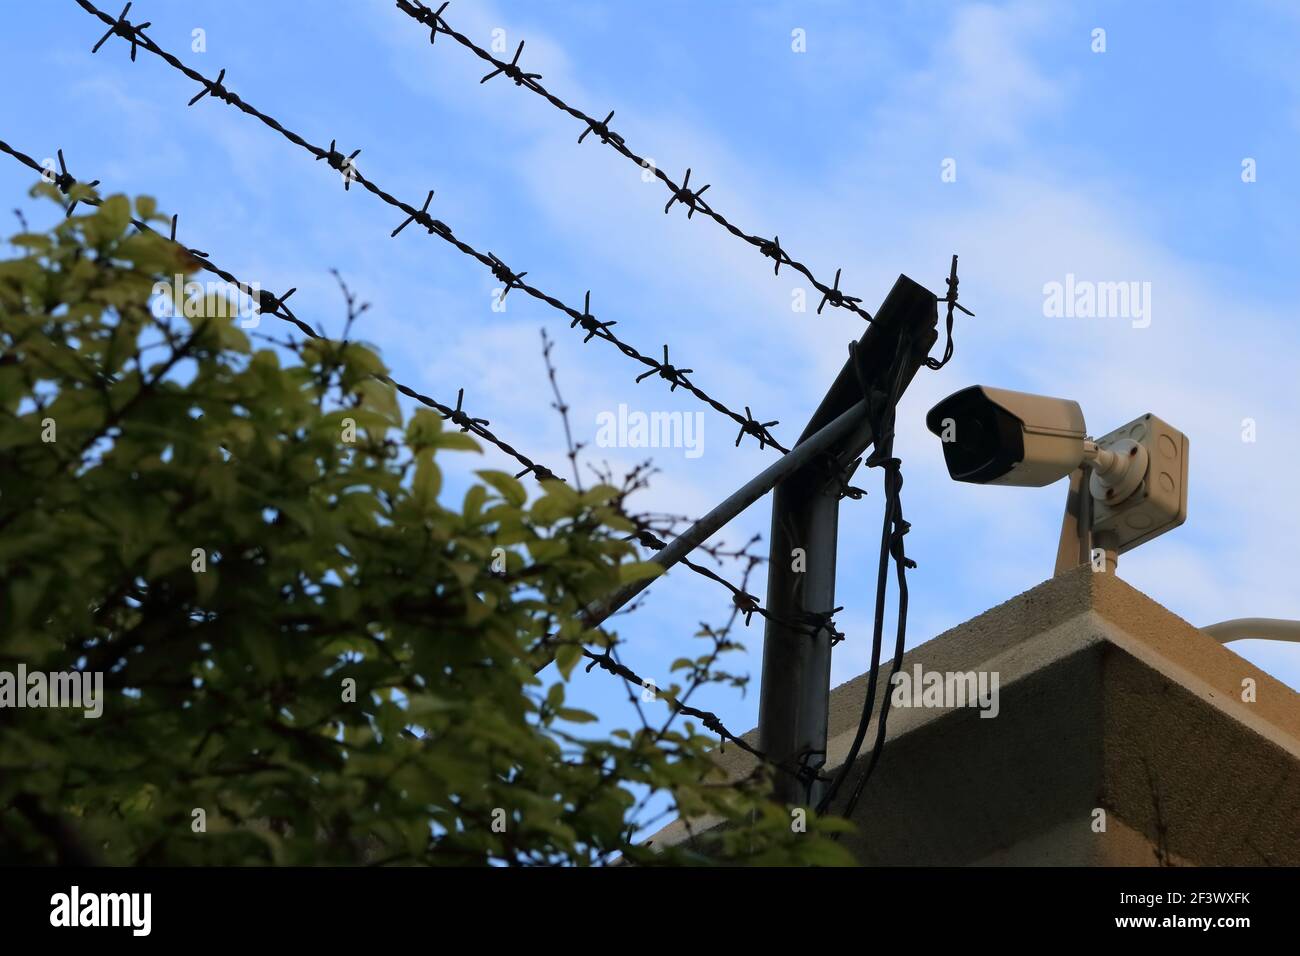 Closeup of security camera installed on rooftop next to barbed wire against blue sky background Stock Photo